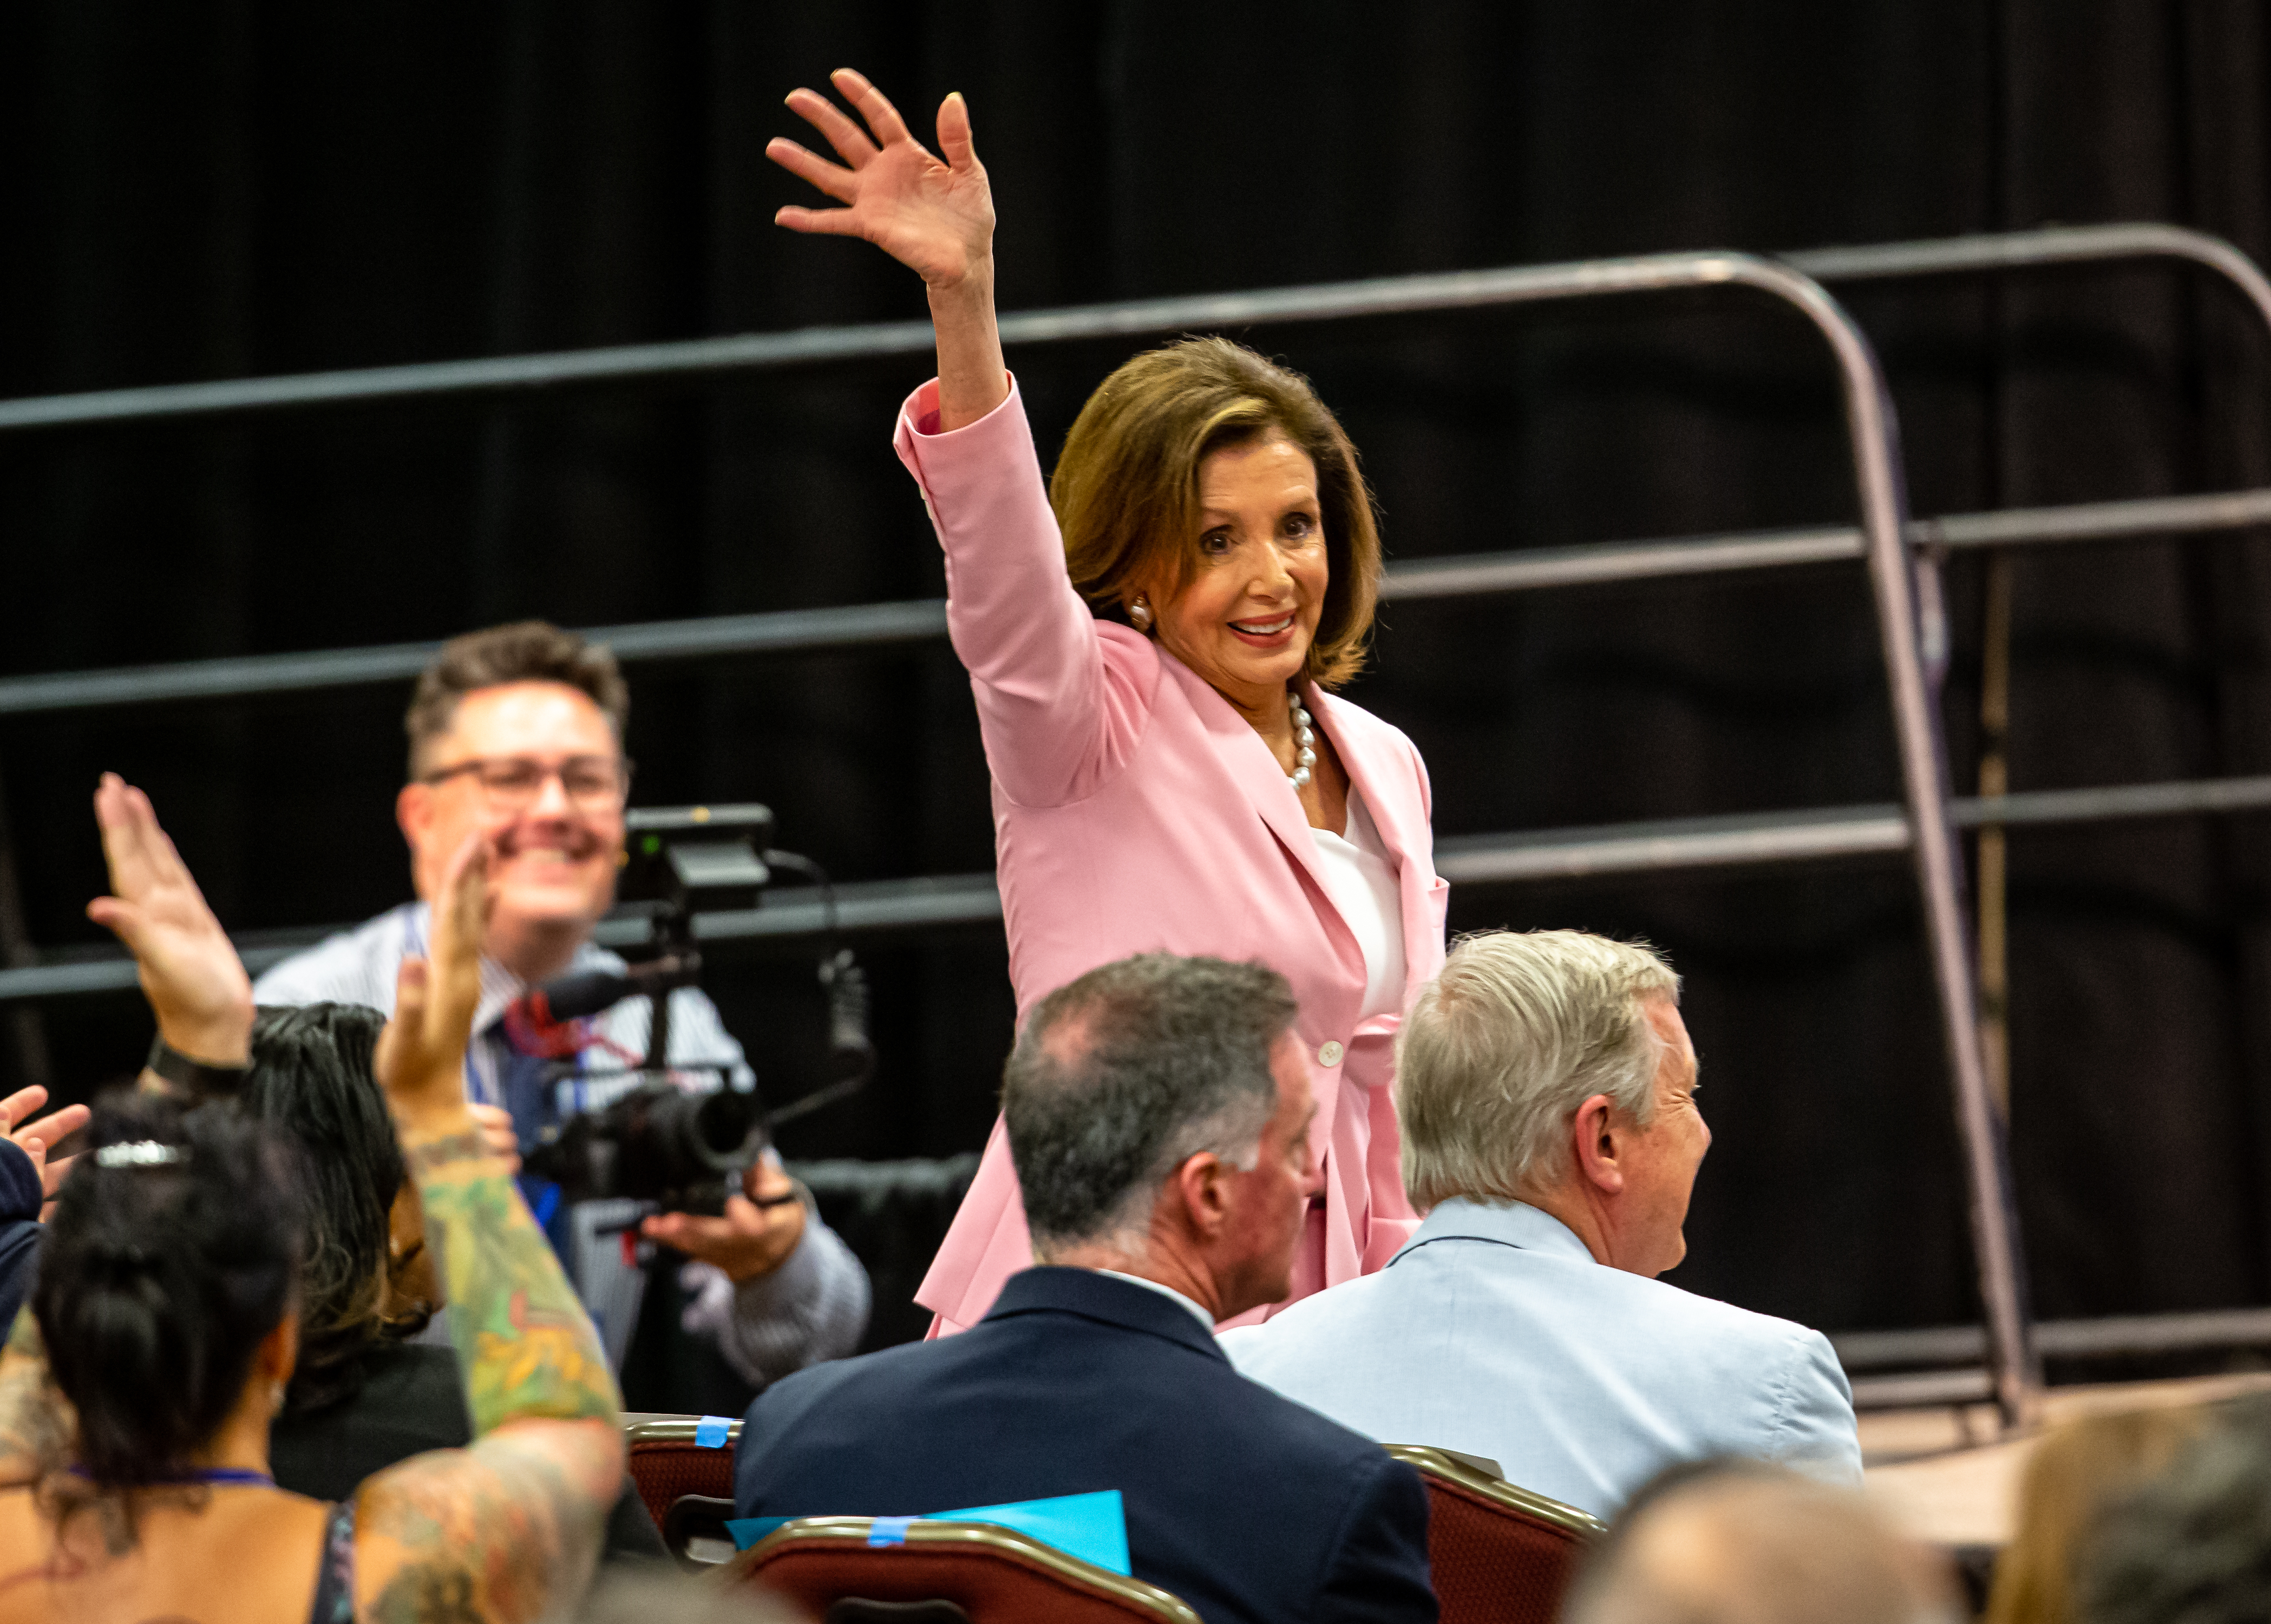 Pelosi and Scalise come to Springfield, Political Days at the Illinois State Fair